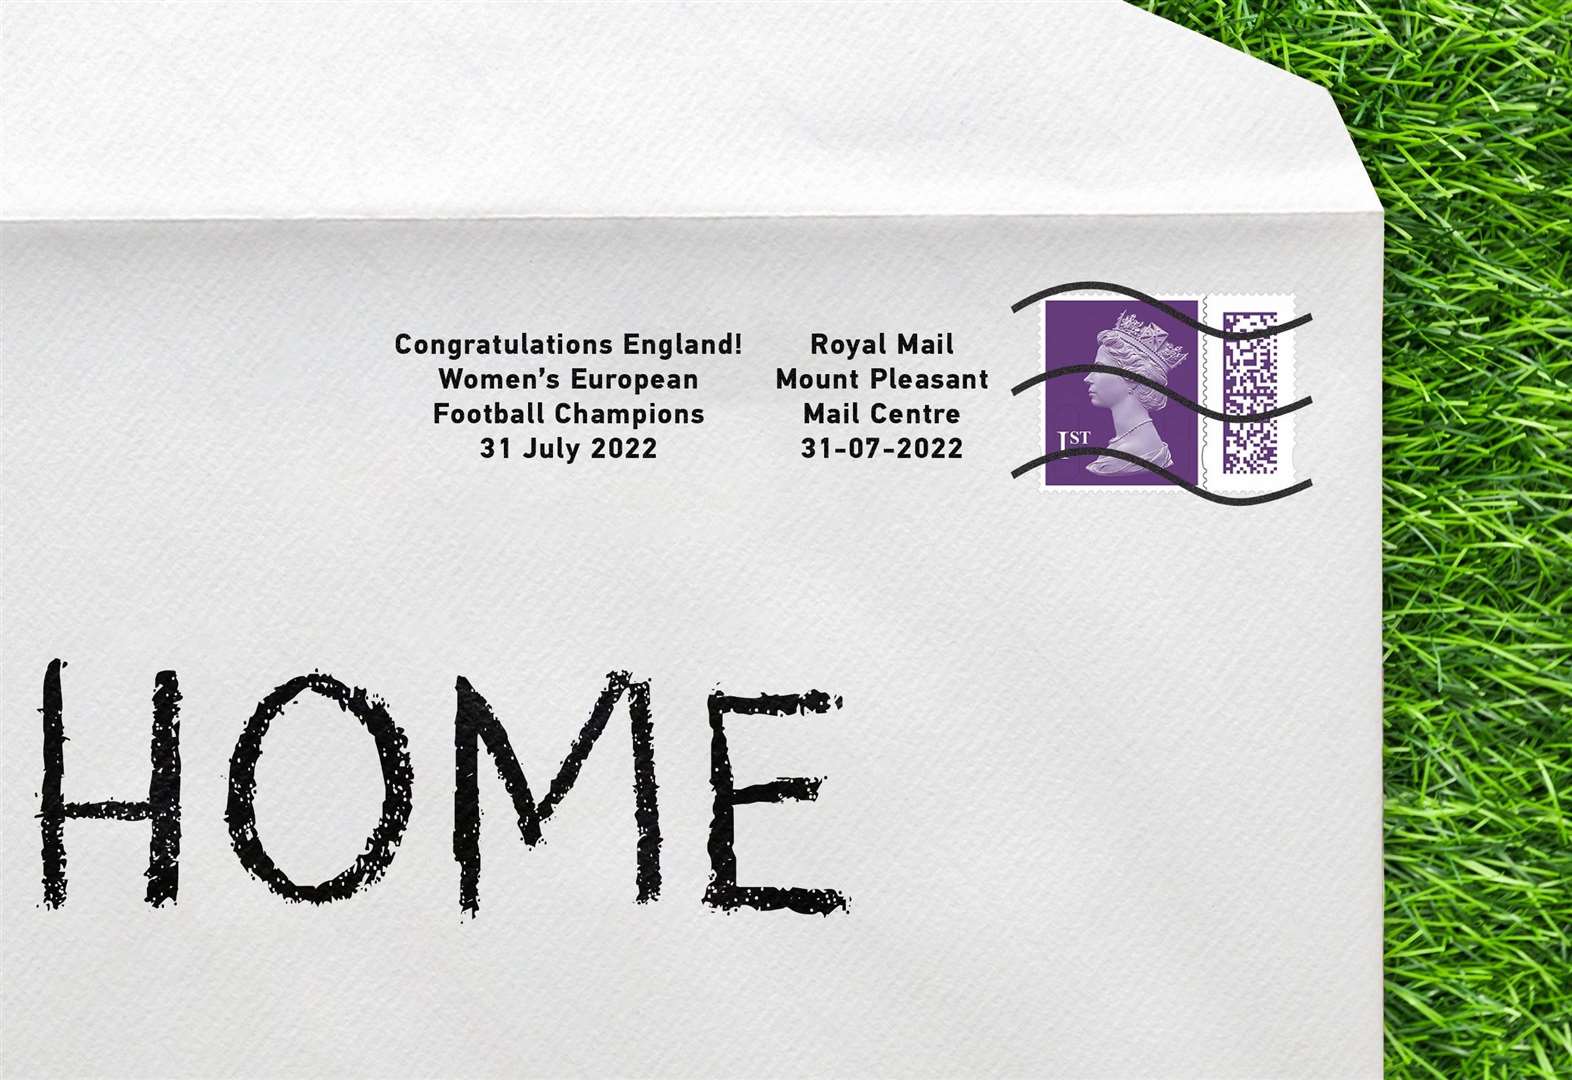 New Royal Mail postmark to celebrate Lionesses' win